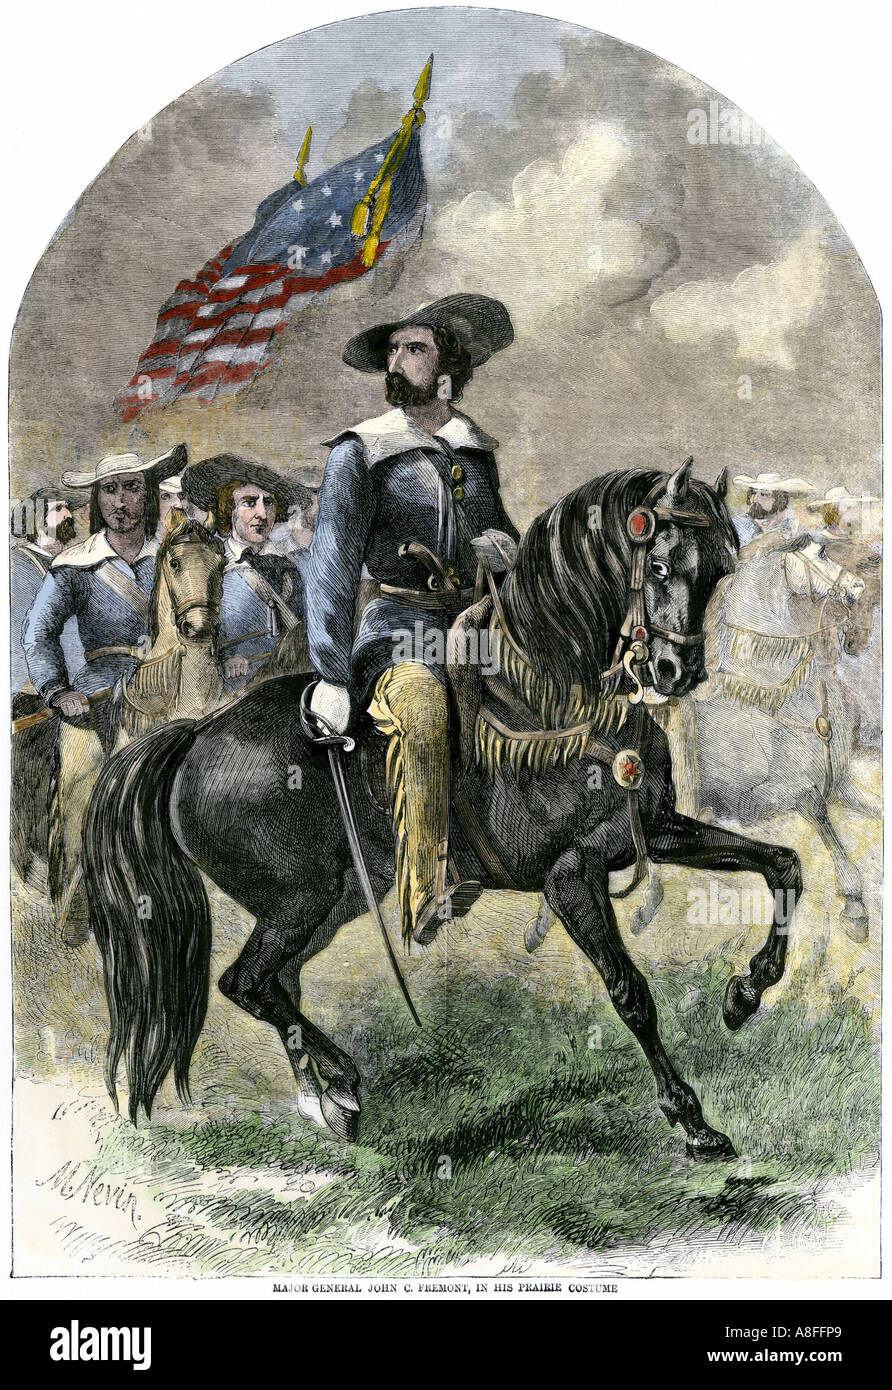 General John C Fremont in his prairie uniform leading a westward expedition. Hand-colored woodcut Stock Photo